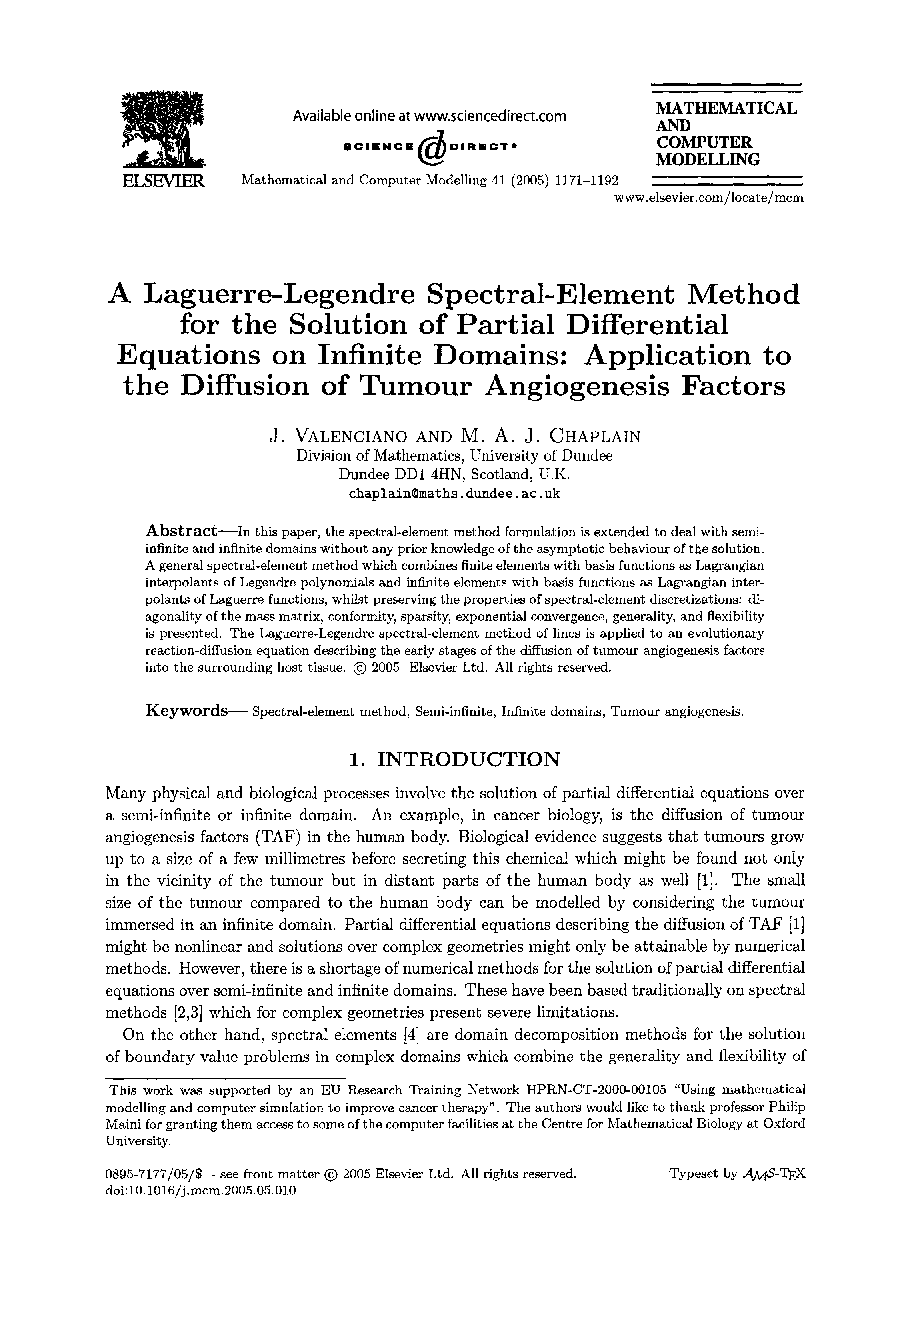 A laguerre-legendre spectral-element method for the solution of partial differential equations on infinite domains: Application to the diffusion of tumour angiogenesis factors